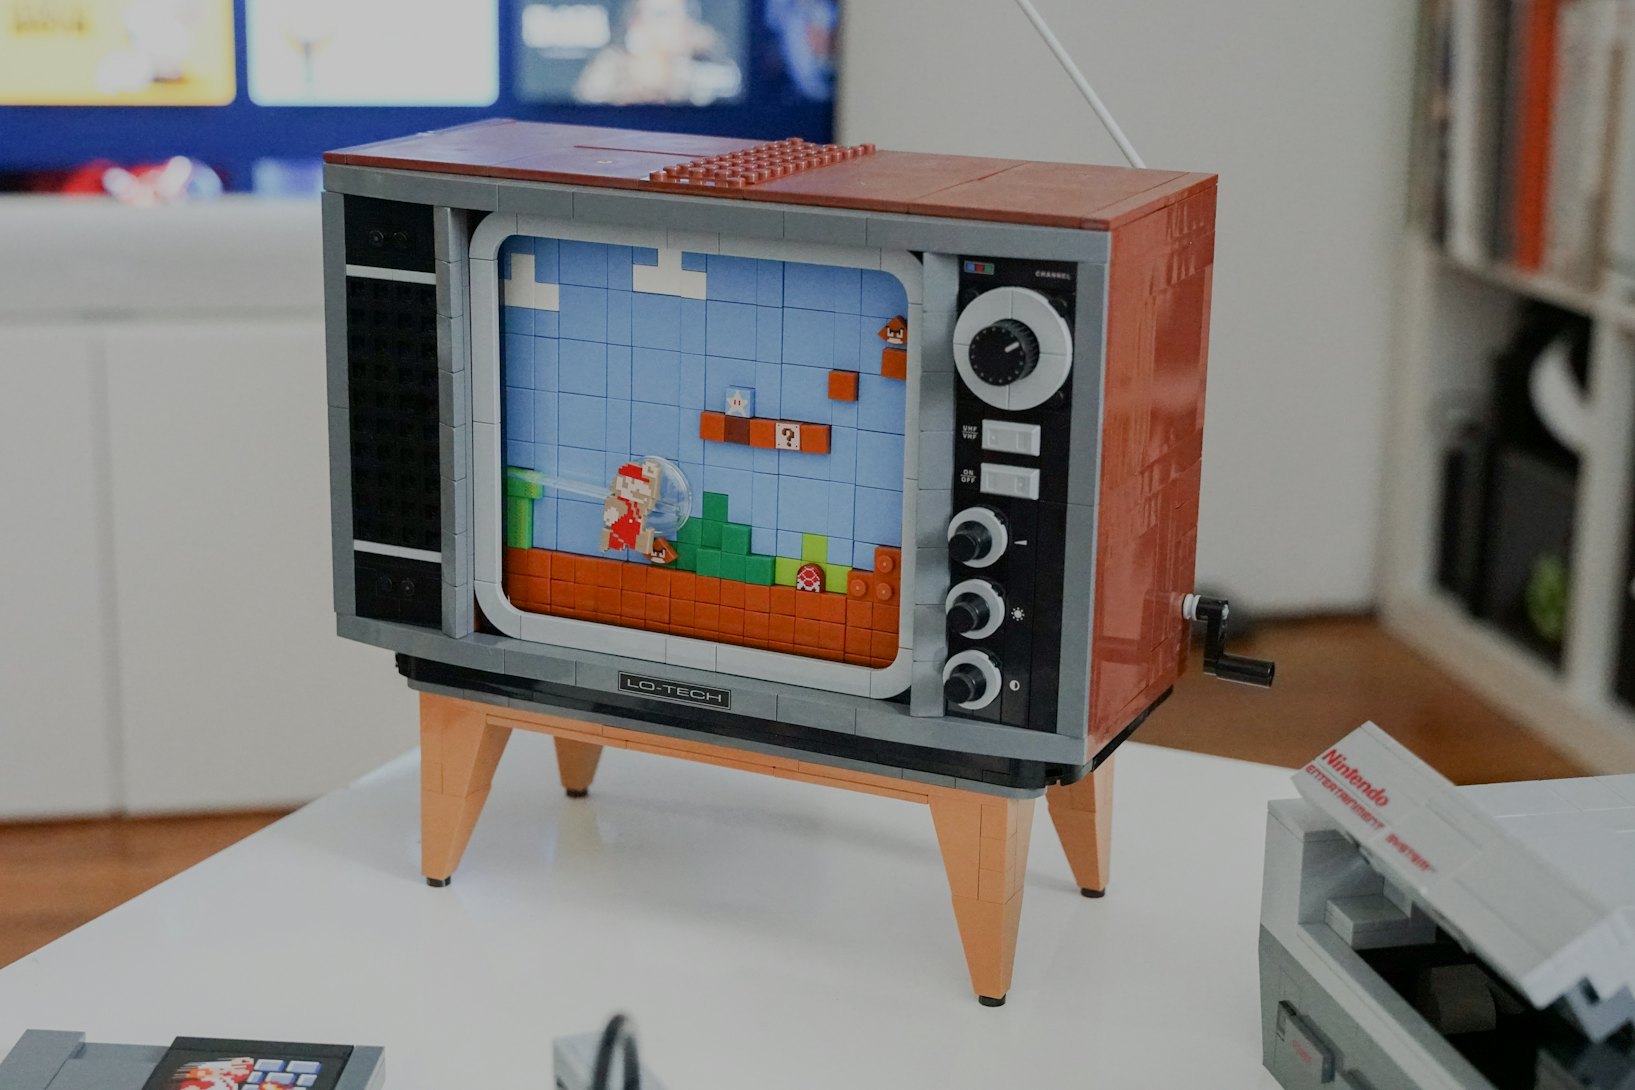 Lego NES review: The coolest toy of 2020. Period.